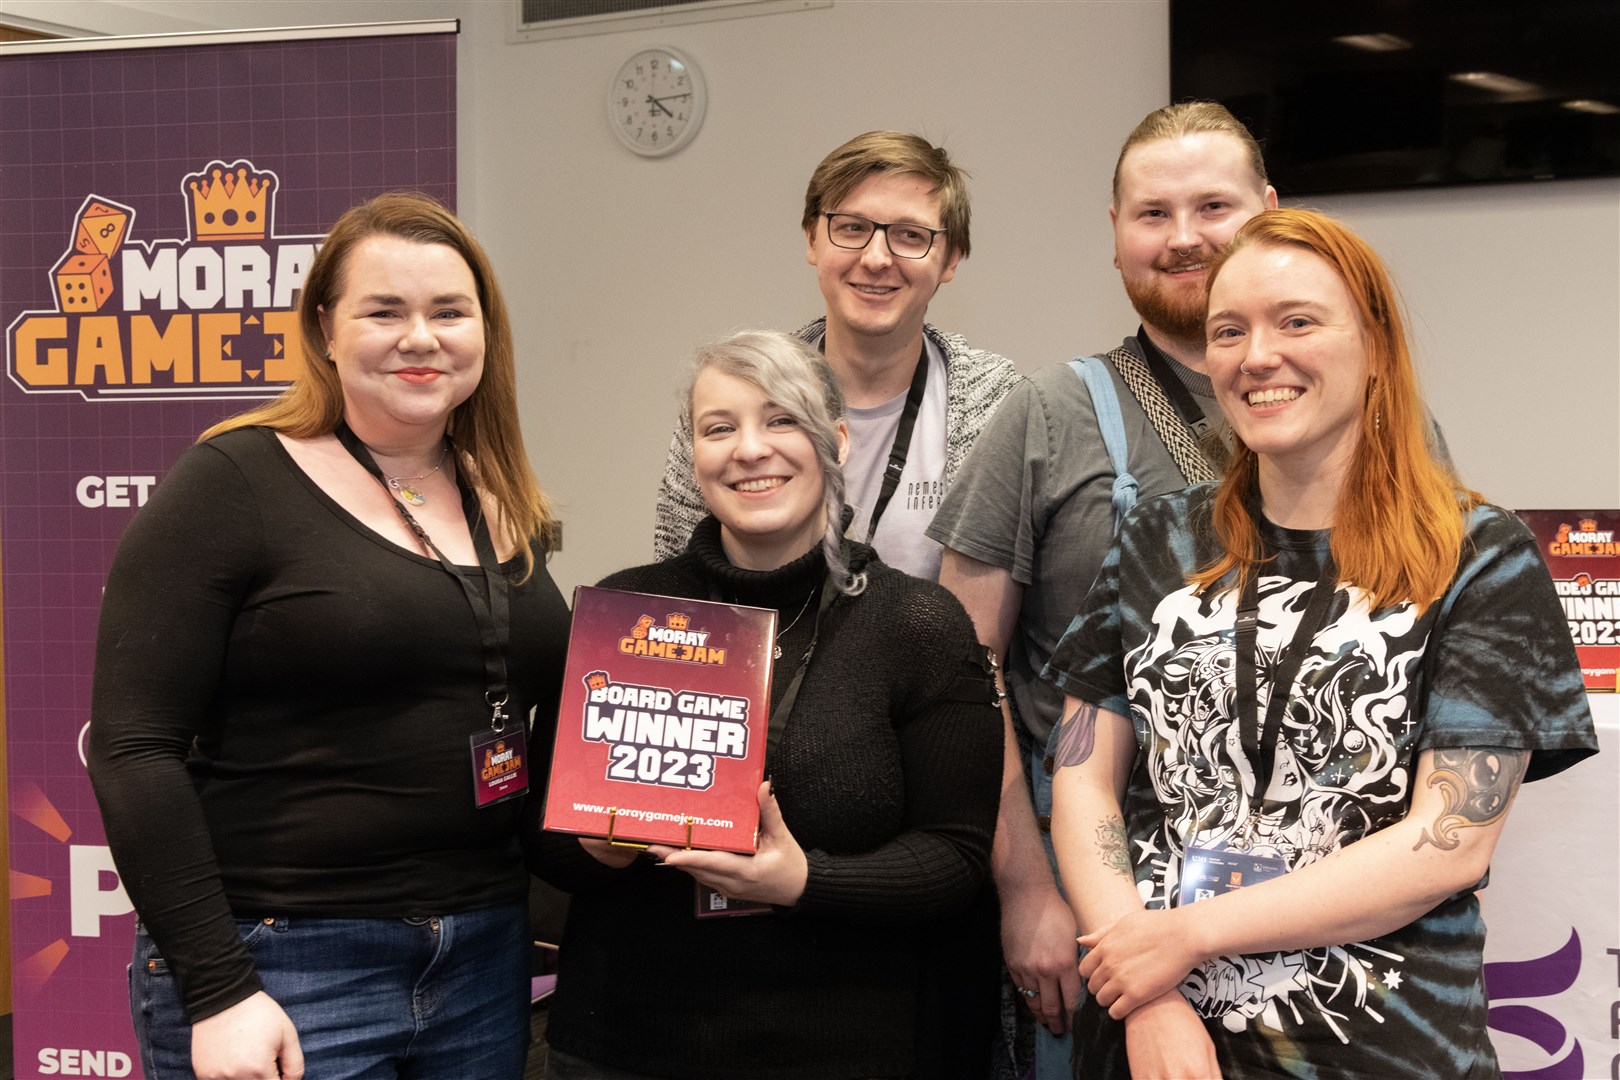 From left: Louisa Gallie presents Cari Watterton, Scott Simpson, Alex Murray and Erin Stevenson with the Board Game Winner trophy with their game, The Monster after Midnight. Picture: Beth Taylor